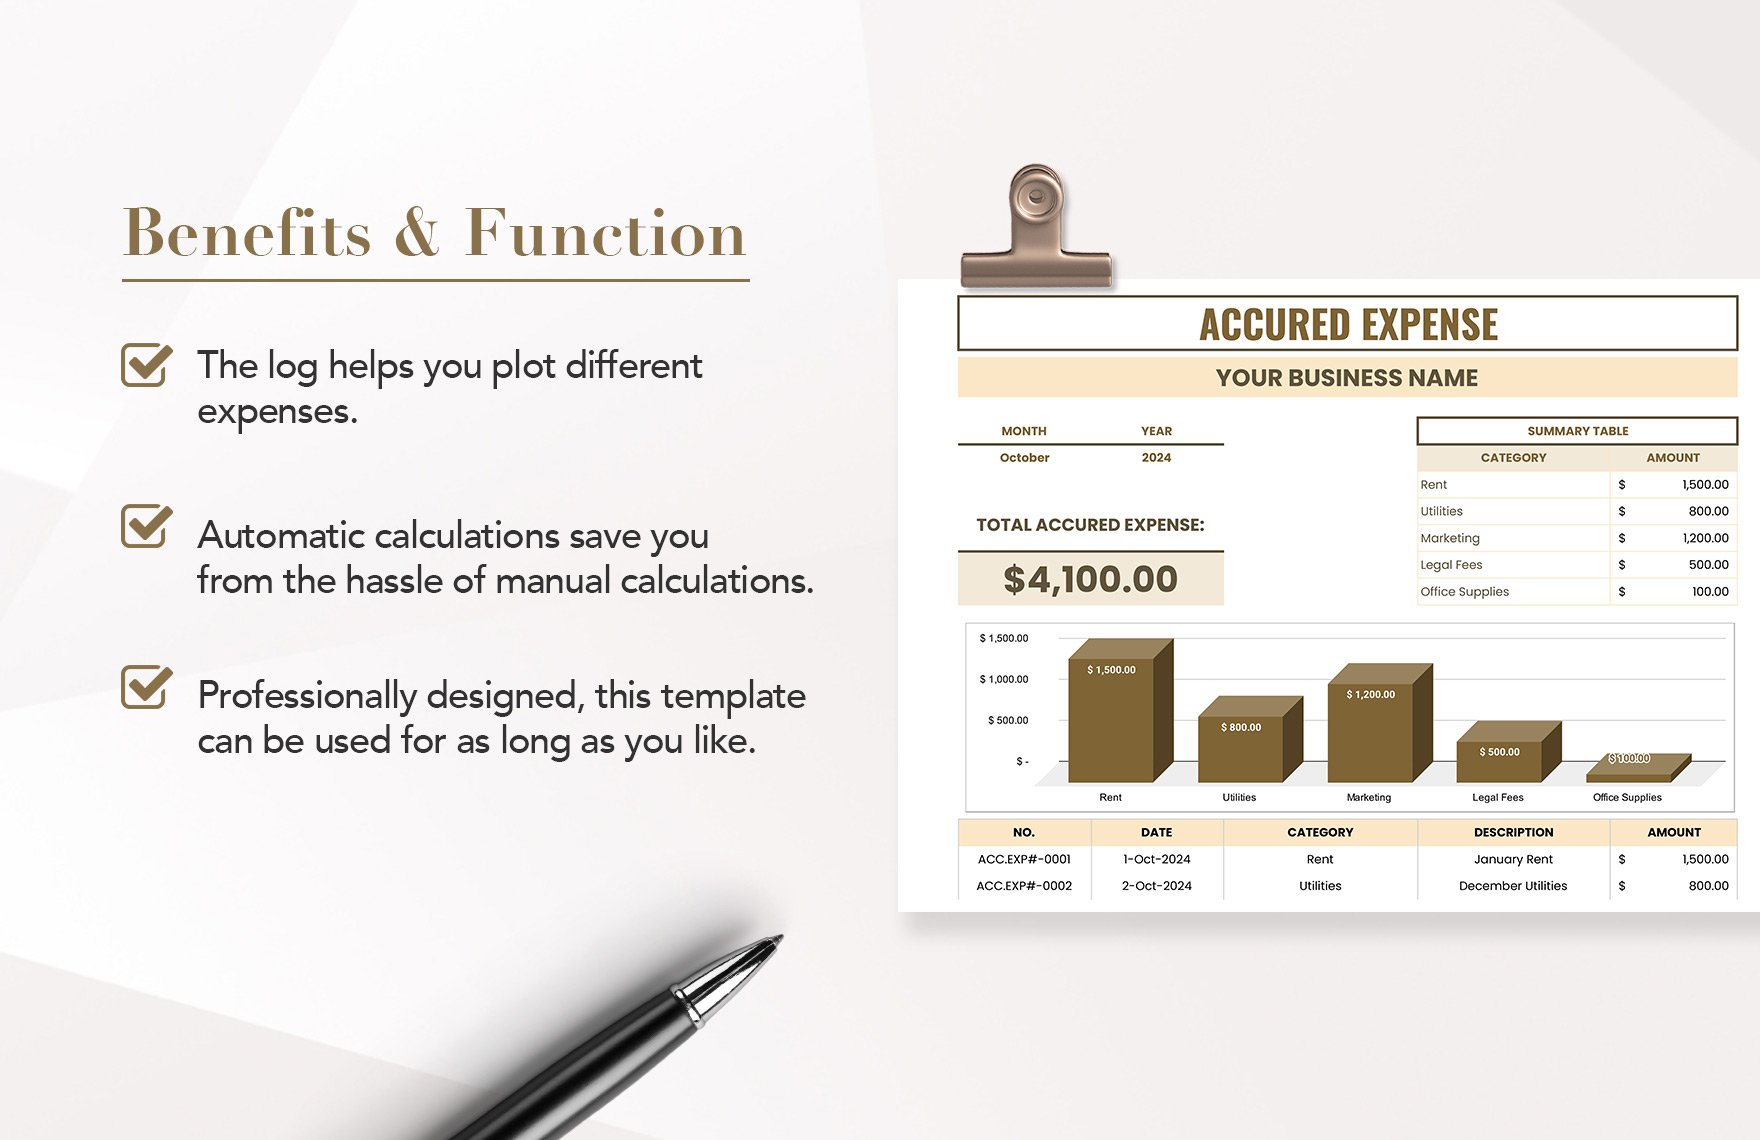 Accured Expense Template